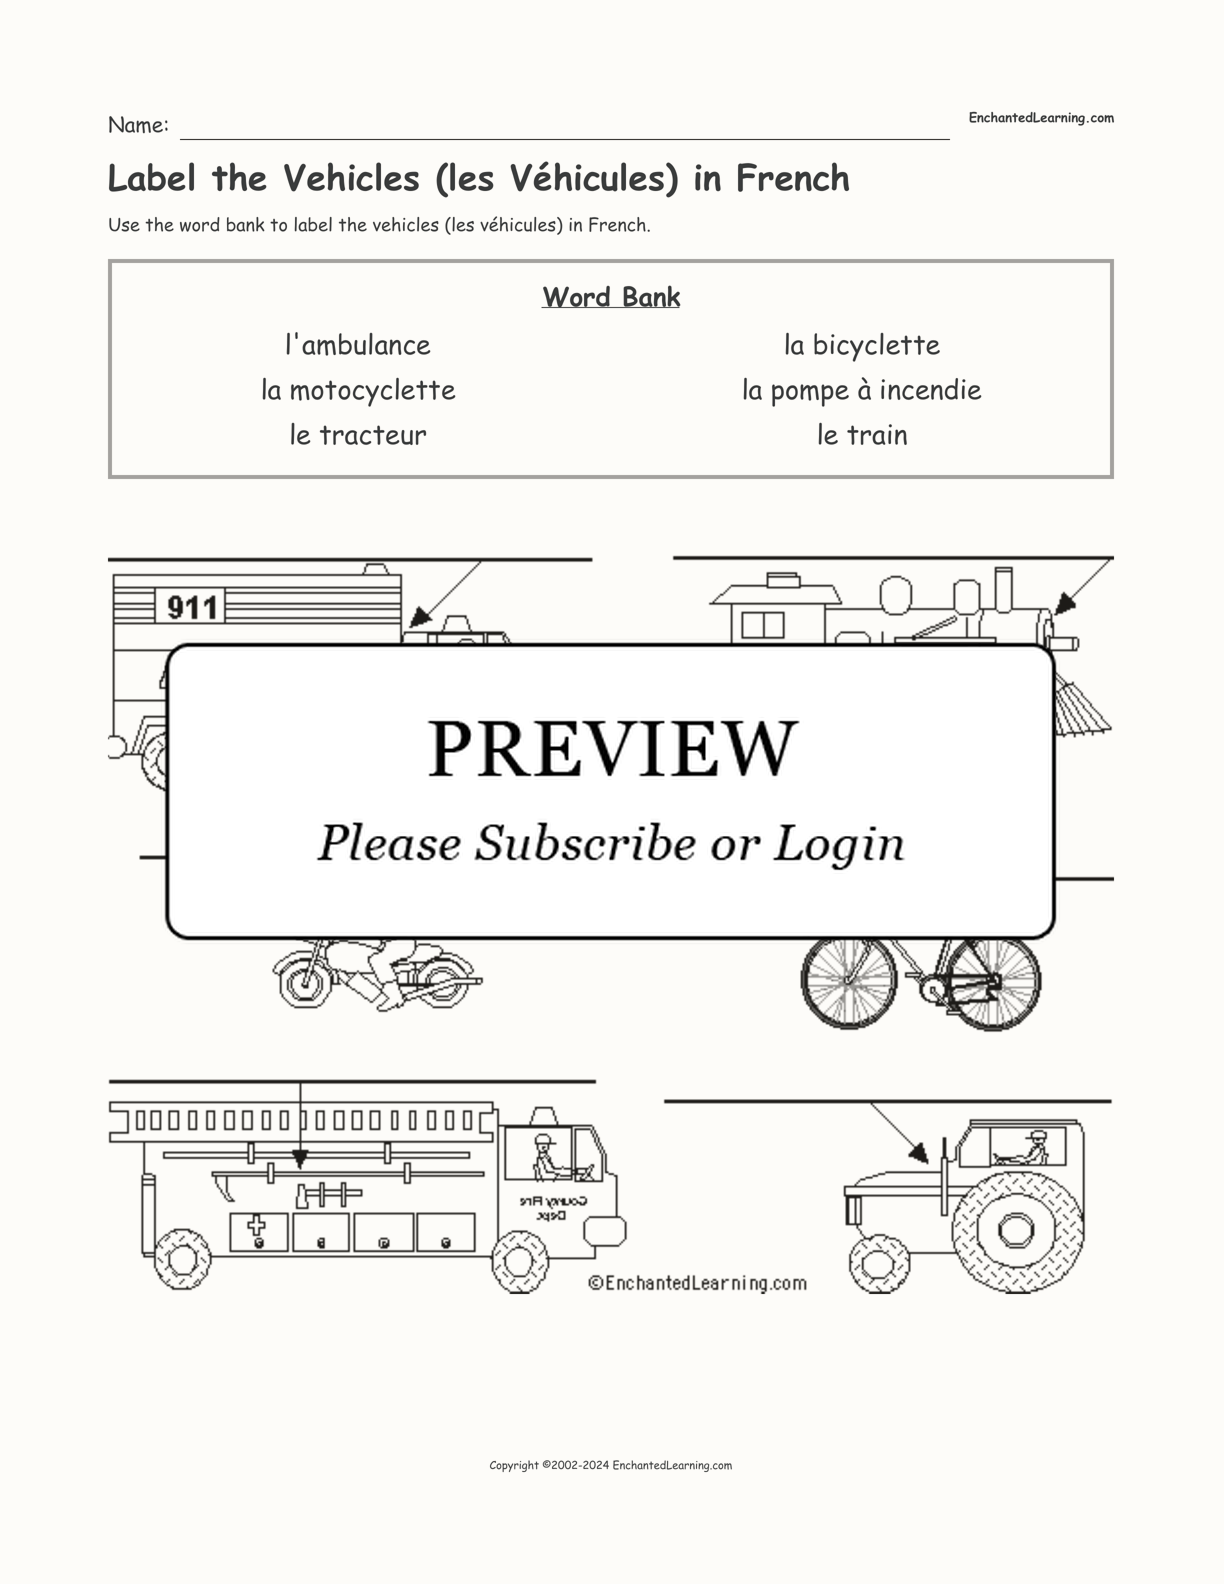 Label the Vehicles (les Véhicules) in French interactive worksheet page 1